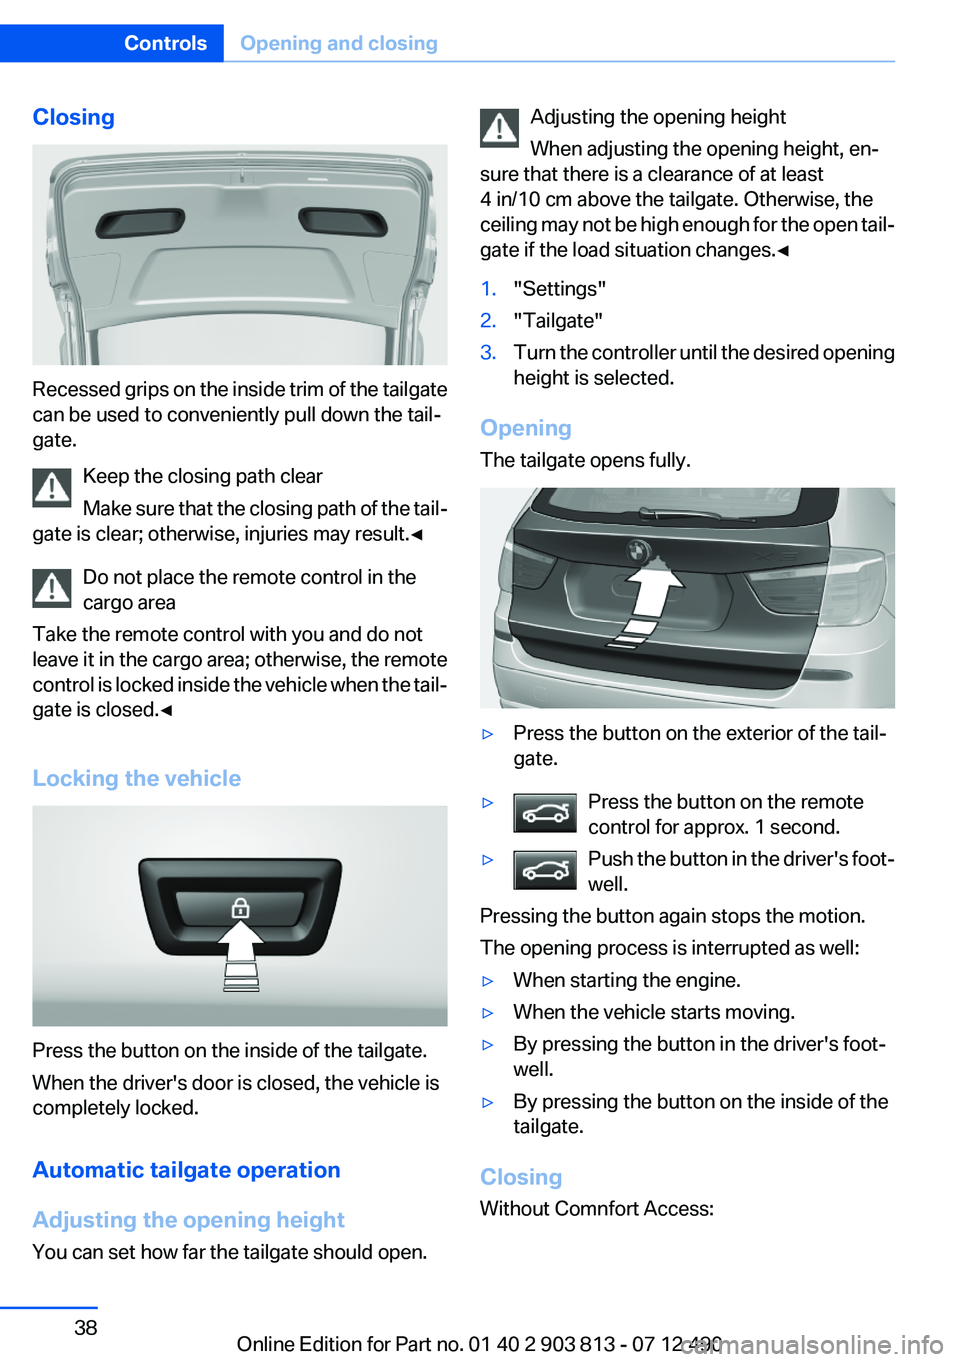 BMW X3 XDRIVE 35I 2013 Owners Guide Closing
Recessed grips on the inside trim of the tailgate
can be used to conveniently pull down the tail‐
gate.
Keep the closing path clear
Make sure that the closing path of the tail‐
gate is cle